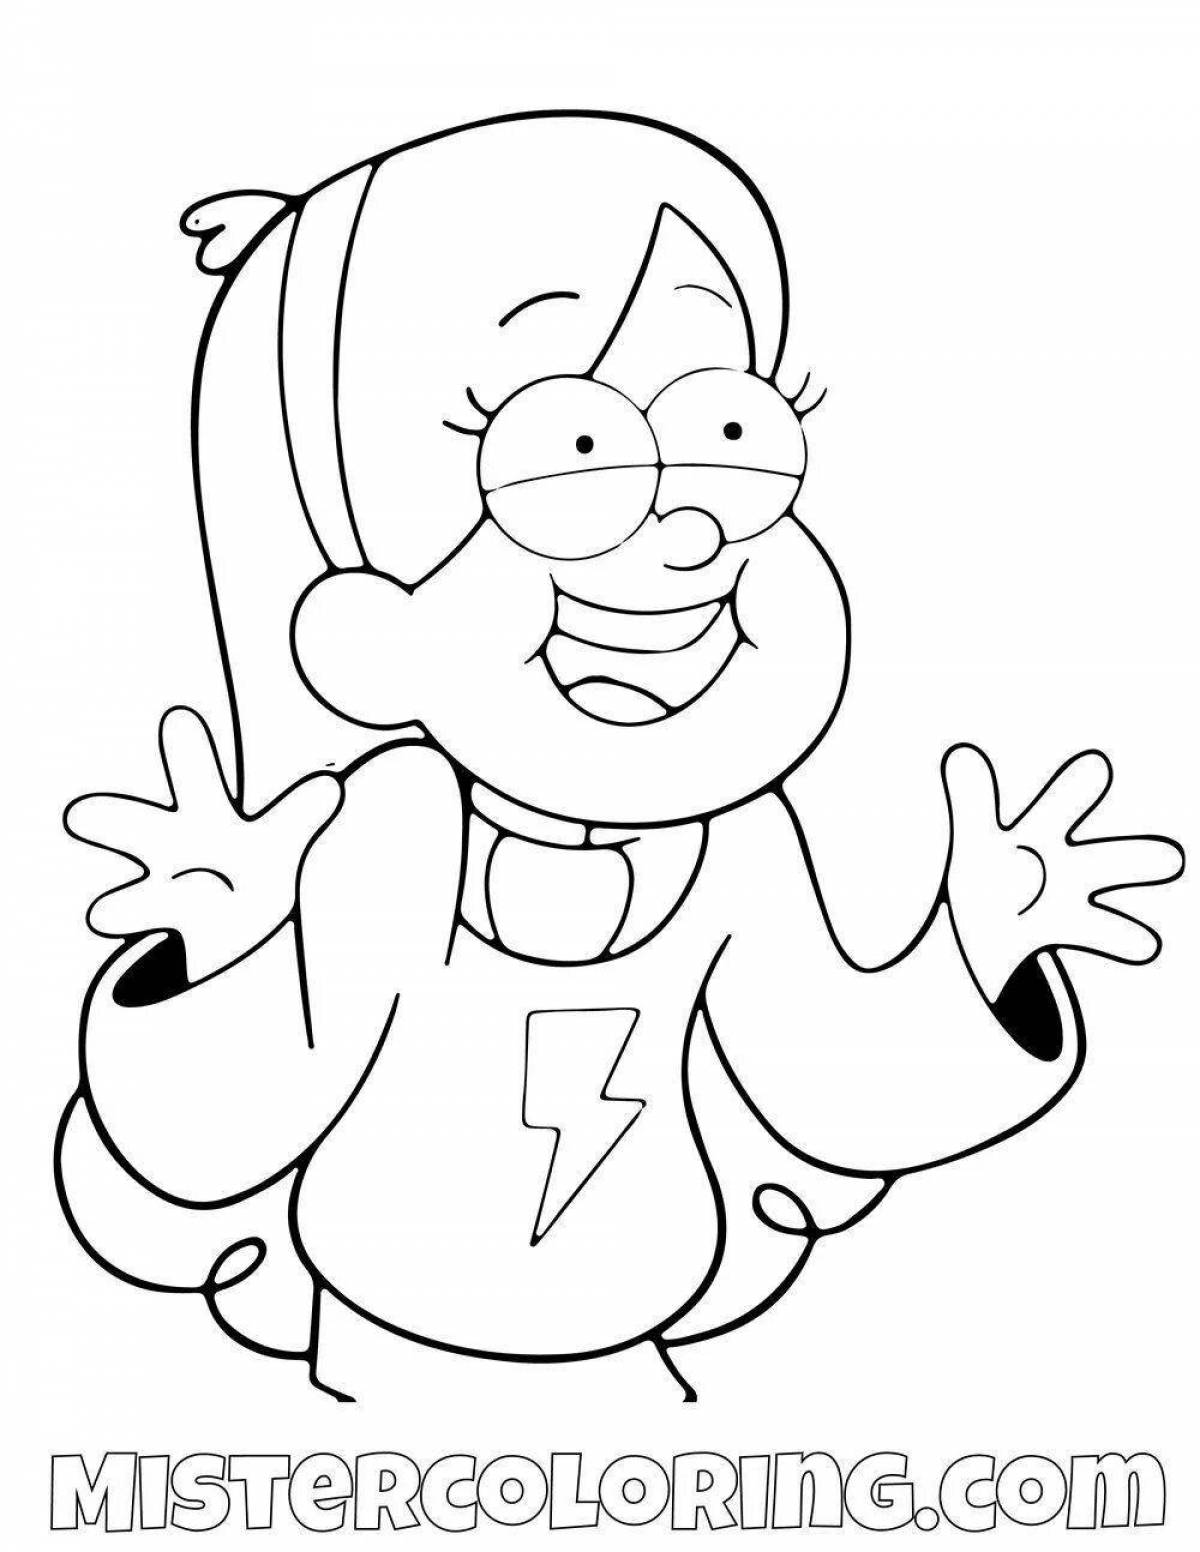 Mabel and chubby coloring book